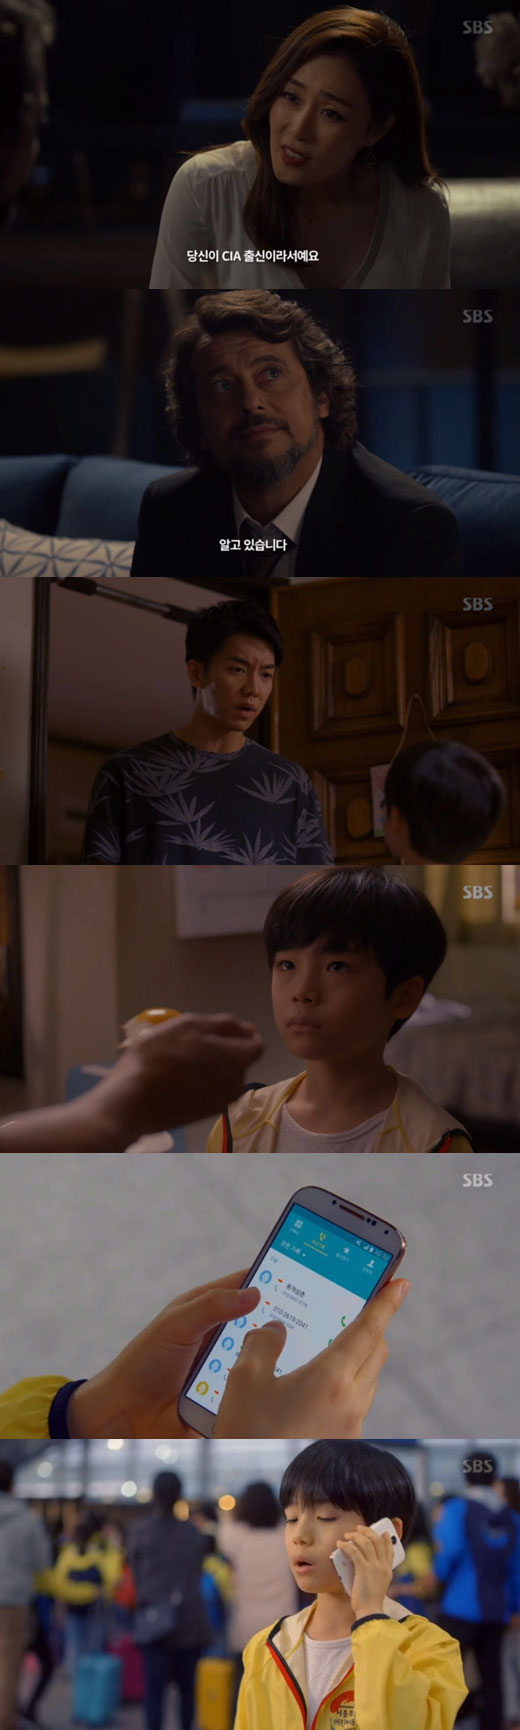 lostMy niece lives with Planes terrorAngered Lee Seung-gi was engulfed in a huge plot when he lost.The SBS gilt drama Vagabond (playplayed by Jang Young-chul, directed by Jung Kyung-soon) aired on the night of the 20th, made its first broadcast.Lee Seung-gi (Chadalgan) was living together with his nephew Hun because his brother died suddenly.Originally a stuntman, Cha Dal-gun quit the Action School and worked as a Taxi knight and was making a hard living.Meanwhile, the Taekwondo demonstration team, which is preparing for the national team, was invited to the 50th anniversary of diplomatic relations between the two countries in Morocco, North Africa.Hoon knows that Chadalgan quit his stunt and does not want to go to Morocco for worrying about living expenses, but with the fact hidden from Chadalgan, Ae left for the airport to take the Planes to Morocco with only a grumpy voice.At the airport, Hoon said, Im going to Planes now, but if you want to see it, look for SoundCloud. Ill put it up.Then a call came to Incheon International Airport.Michael, a former employee of Moon Jeong-hee (Jessica Lee), said on a pay phone from Lisbon, You have to stop Air B357 bound for Morocco; a terrorist got in.We have to stop taking off right away, he told staff.However, in the control room inside the Incheon airport, a sprinkler suddenly bursts, and Michael, who informed the aviation error, is shot and killed by someone.Meanwhile, Suzy (Gohari), an NIS black agent spying on the Morocco embassy, called someone and said, Its a pistol suicide.The results will not change even if an autopsy is done. The terrorist who caught up with the Planes of Hoon explodes the Planes, and Hoon dies without sending the last letter to Chadalgan.Cha Dal-gun, who was eating rice while purchasing sneakers as a birthday gift of Hoon, is frustrated when he heard the news that all passengers in Hoons cold Planes died.Moon Sung-keun (Hong Soon-jo), the presidents secretary, told President Baek Yoon-sik (Jungkook Table), It is the latest model made by Dynamic Systems. It is very likely to be a gas defect.It is better not to take any steps to the media until the fact-finding team announces it. Jungkook said in a briefing to the people, I heard the saddest and saddest news in my life today.I am very tired of even holding my body in the sense of self-defeating that I have not kept the lives of the people. I sincerely express my condolences and condolences to the bereaved families and the people who are still sharing pain for the moment.Chadalgan, who was watching the SoundCloud video left by Hoon, sees the video message left by Hoon before the Planes takeoff.It took The Uncle to throw away the movies, CDs, books. I brought it back. Why did you stop at Action School?The Uncle is the coolest when you are in Action. If you go, please fry the egg. Cha Dal-gun headed to Morocco for a memorial ceremony with his family and recognized the terrorist in the Planes, which was photographed in the video of Hoon in the airport toilet.Chadalgan, who chased the terrorist on Taxi, fought in the middle of an alley with the terrorist.I heard that all the people in the Planes are dead. How are you alive? It was you. You killed our Hoon.Why did you drop Planes? he shouted.Chadalgan hit his head hard and climbed into the truck of a fleeing terrorist and caught up to the end, but he fell down the cliff in the car.